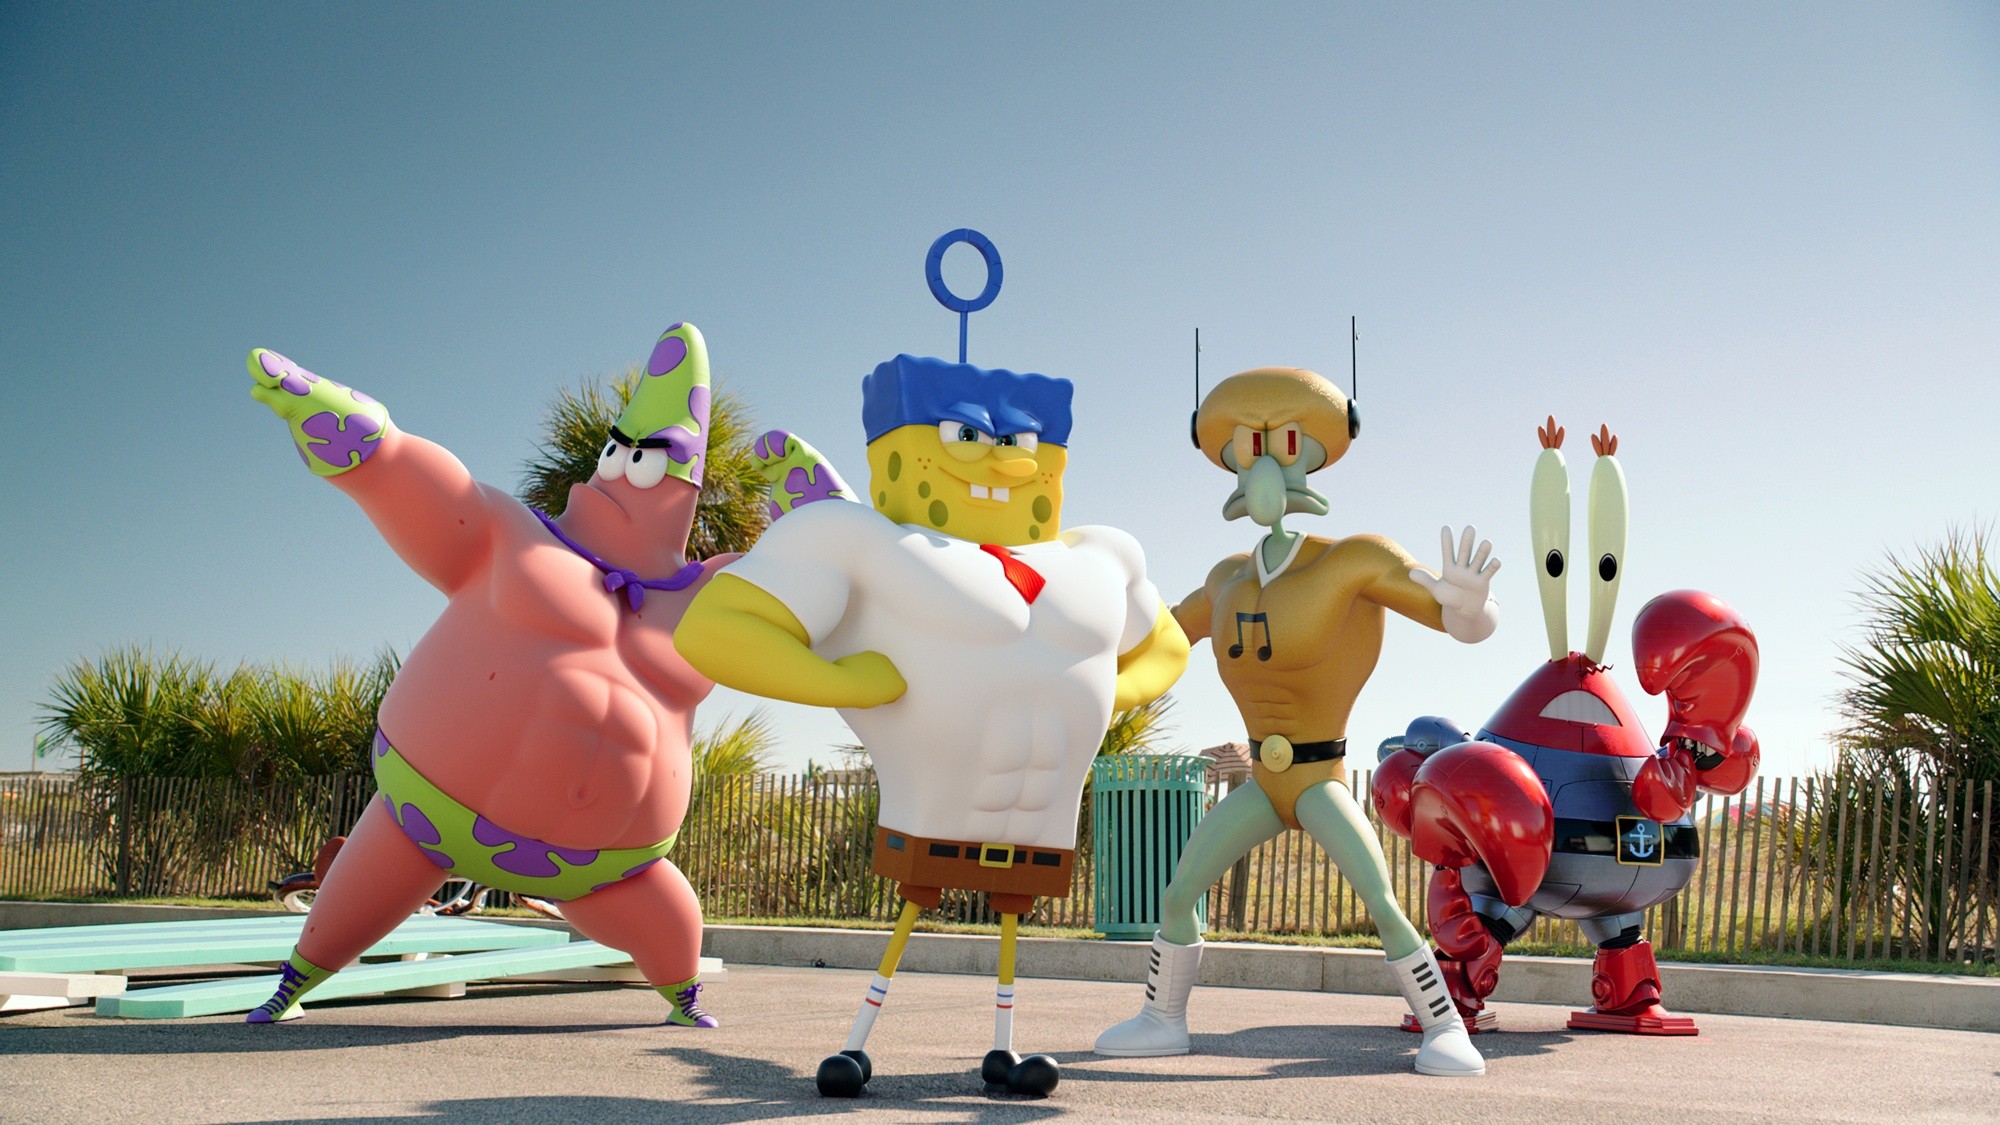 Patrick Star, SpongeBob SquarePants, Squidward Tentacles and Mr. Krabs in Paramount Pictures' The SpongeBob Movie: Sponge Out of Water (2015)